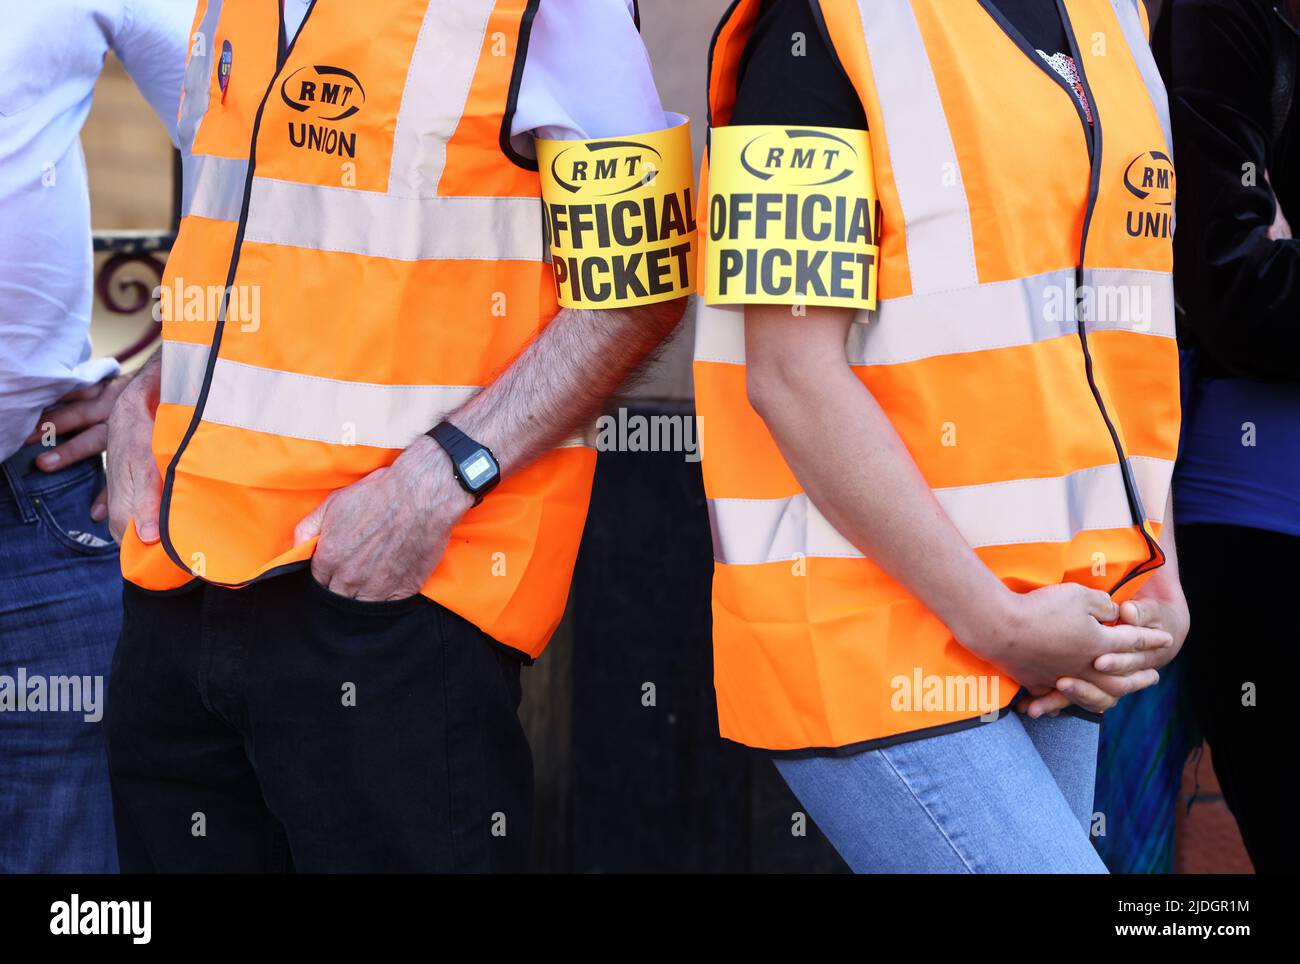 Leicester, Leicestershire, UK. 21st June 2022. Rail workers stand on a picket line as they stage the first of three national strikes. The RMT called the strikes over job cuts, pay and conditions. Credit Darren Staples/Alamy Live News. Stock Photo